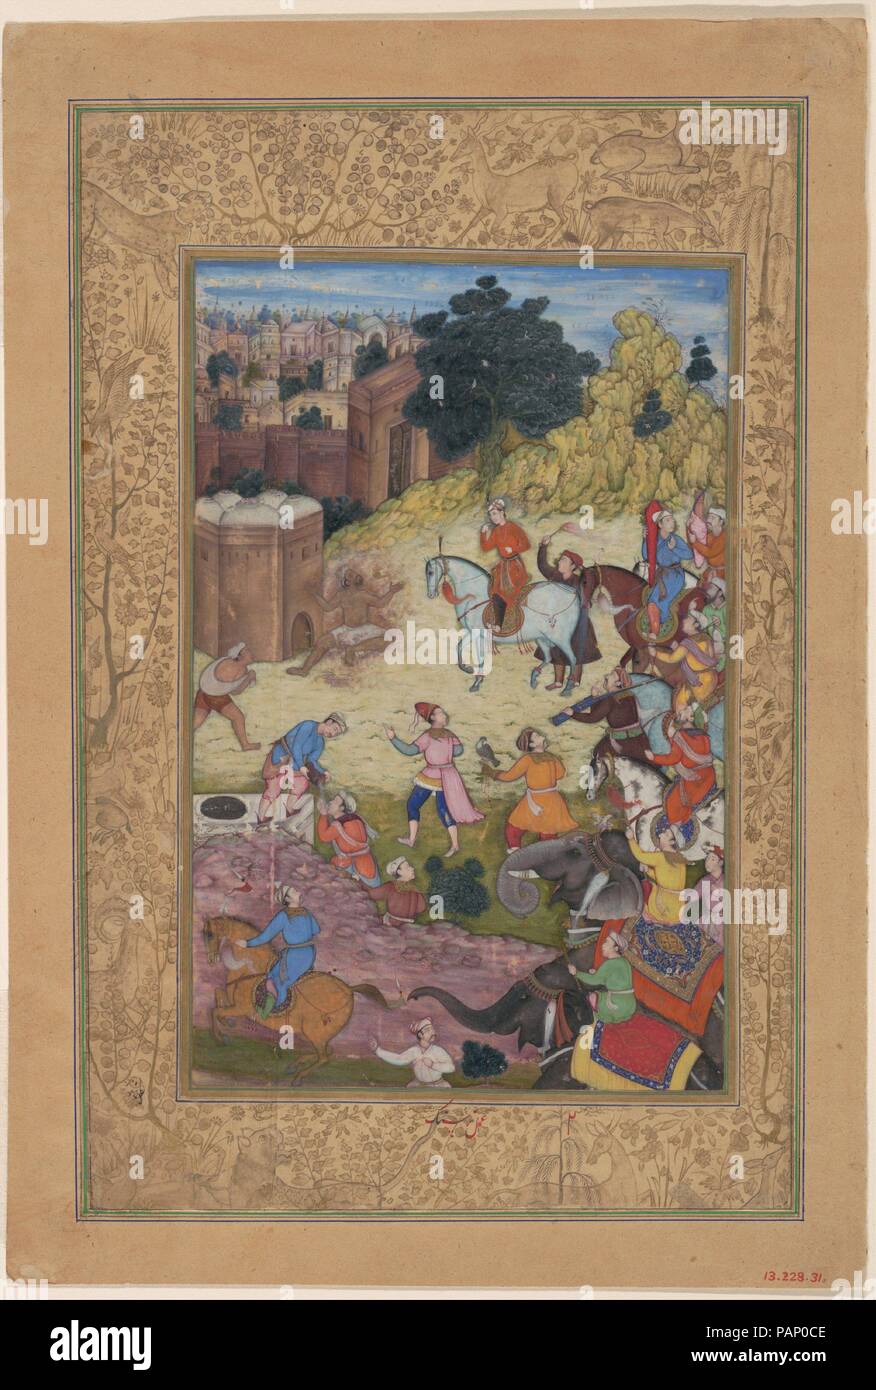 "A Bathhouse Keeper is Consumed by Passion for his Beloved", Folio from a Khamsa (Quintet) of Amir Khusrau Dihlavi. Artist: Painted by Nar Singh. Dimensions: Image: H. 10 in. (25.4 cm)   W. 6 1/2 in. (16.5 cm)  Page: H. 11 1/4 in. (28.6 cm)  W. 7 7/8 in. (20 cm)  Mat: H. 19 1/4 in. (48.9 cm)   W. 14 1/4 in. (36.2 cm). Poet: Amir Khusrau Dihlavi (1253-1325). Date: 1597-98.  Matla' al-Anwar (Rising of the Luminaries), the first poem of Amir Khusrau Dihlavi's Quintet, is comprised of 3310 verses compiled approximately in twenty Maqalat (didactic discourses). Matla' al-Anwar is a response by Amir  Stock Photo